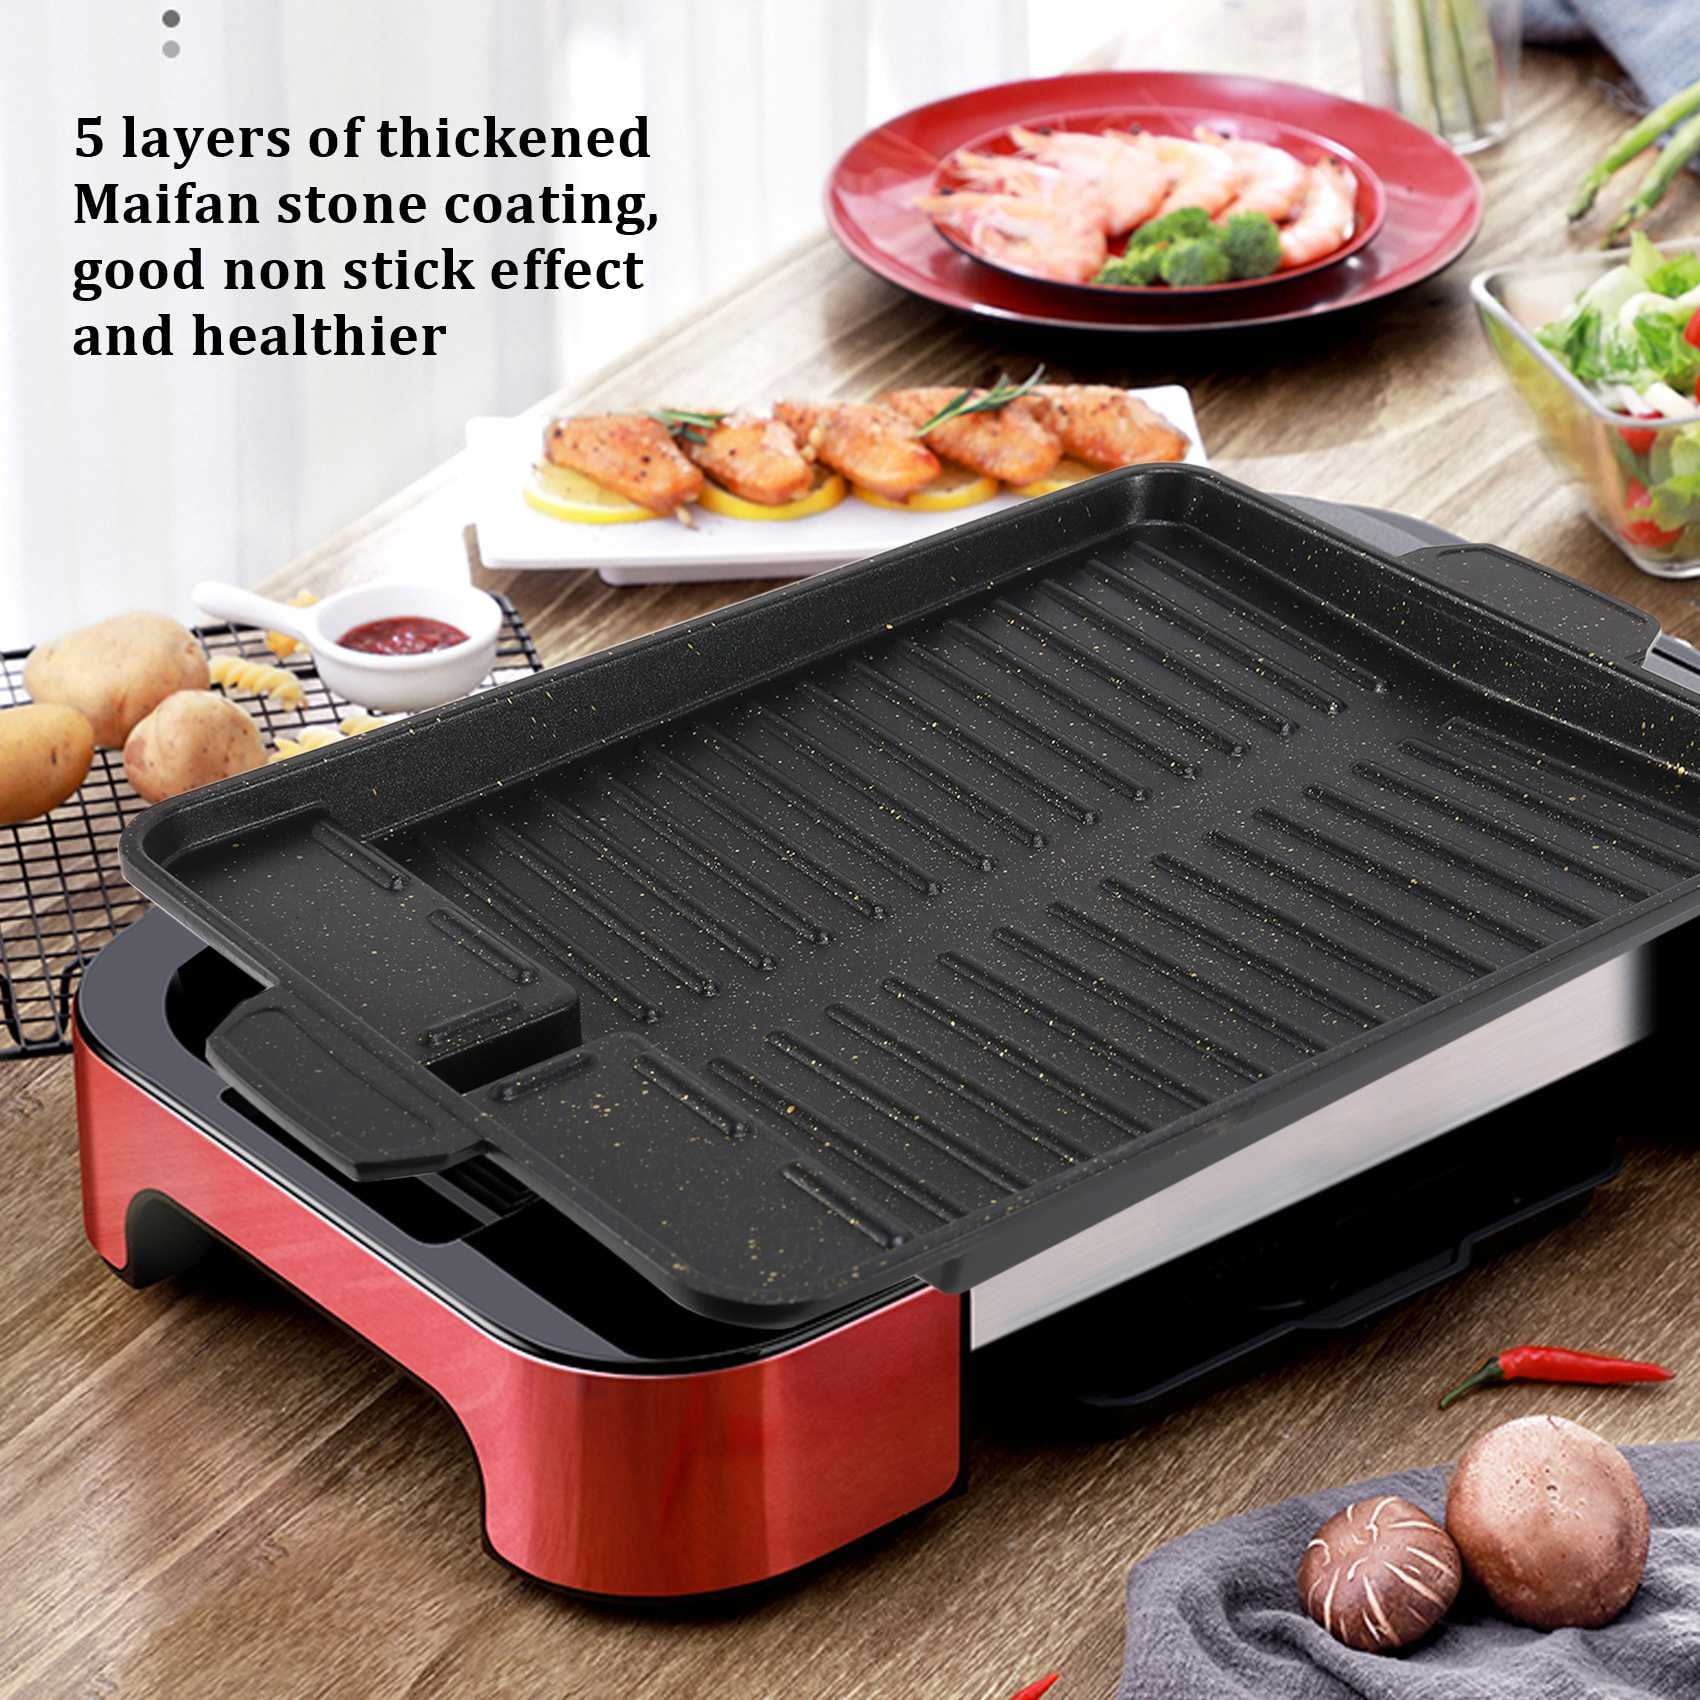 eboxer-1 RNAB08CV4PWB3 eboxer korean style bbq grill pan non stick barbecue  plate for indoor outdoor grilling, bakeware for home camping